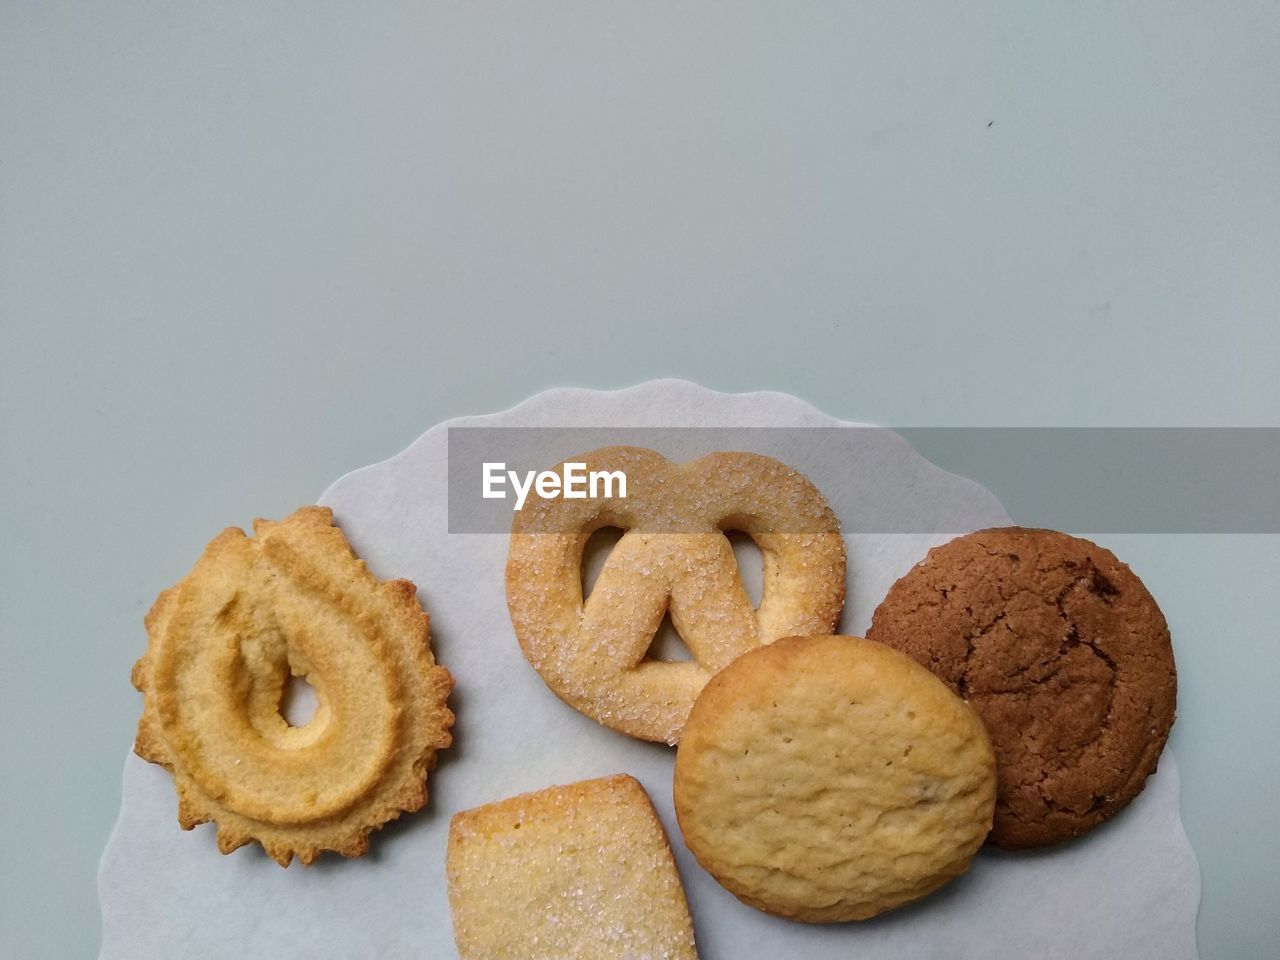 CLOSE-UP OF COOKIES